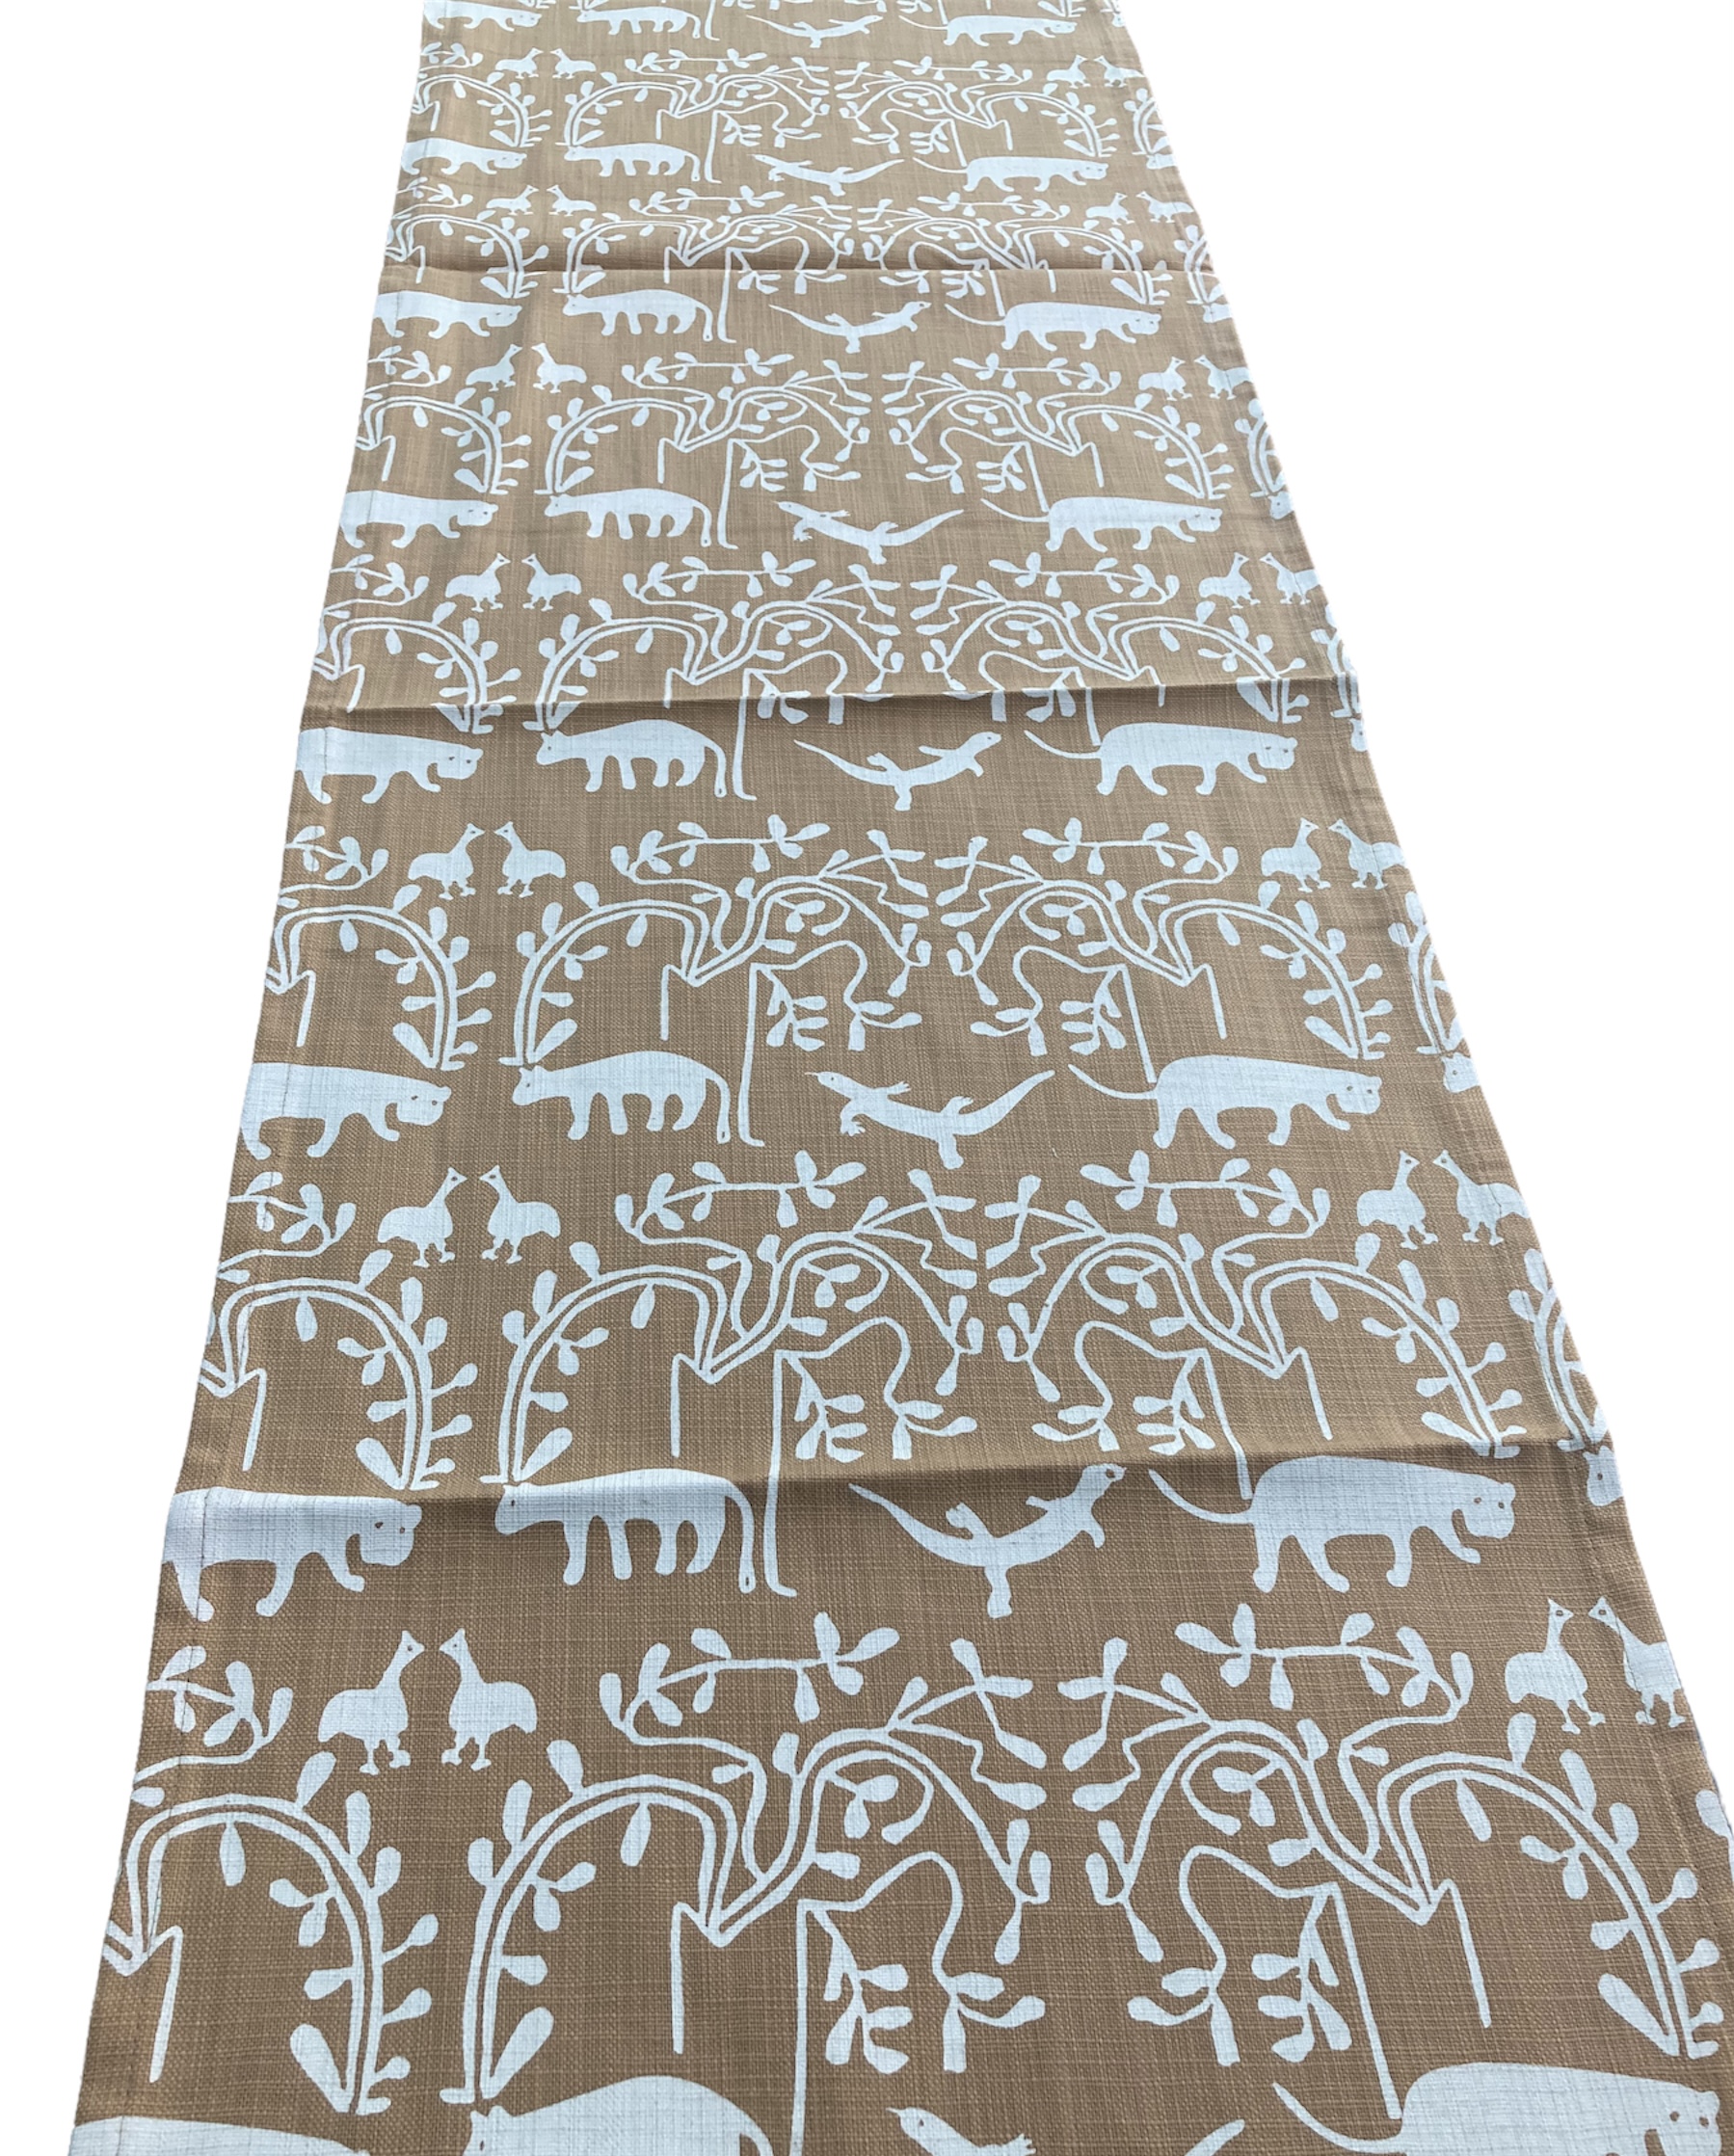 100% cotton Table Runner 58\" x 16\" from Namibia - Design 17s